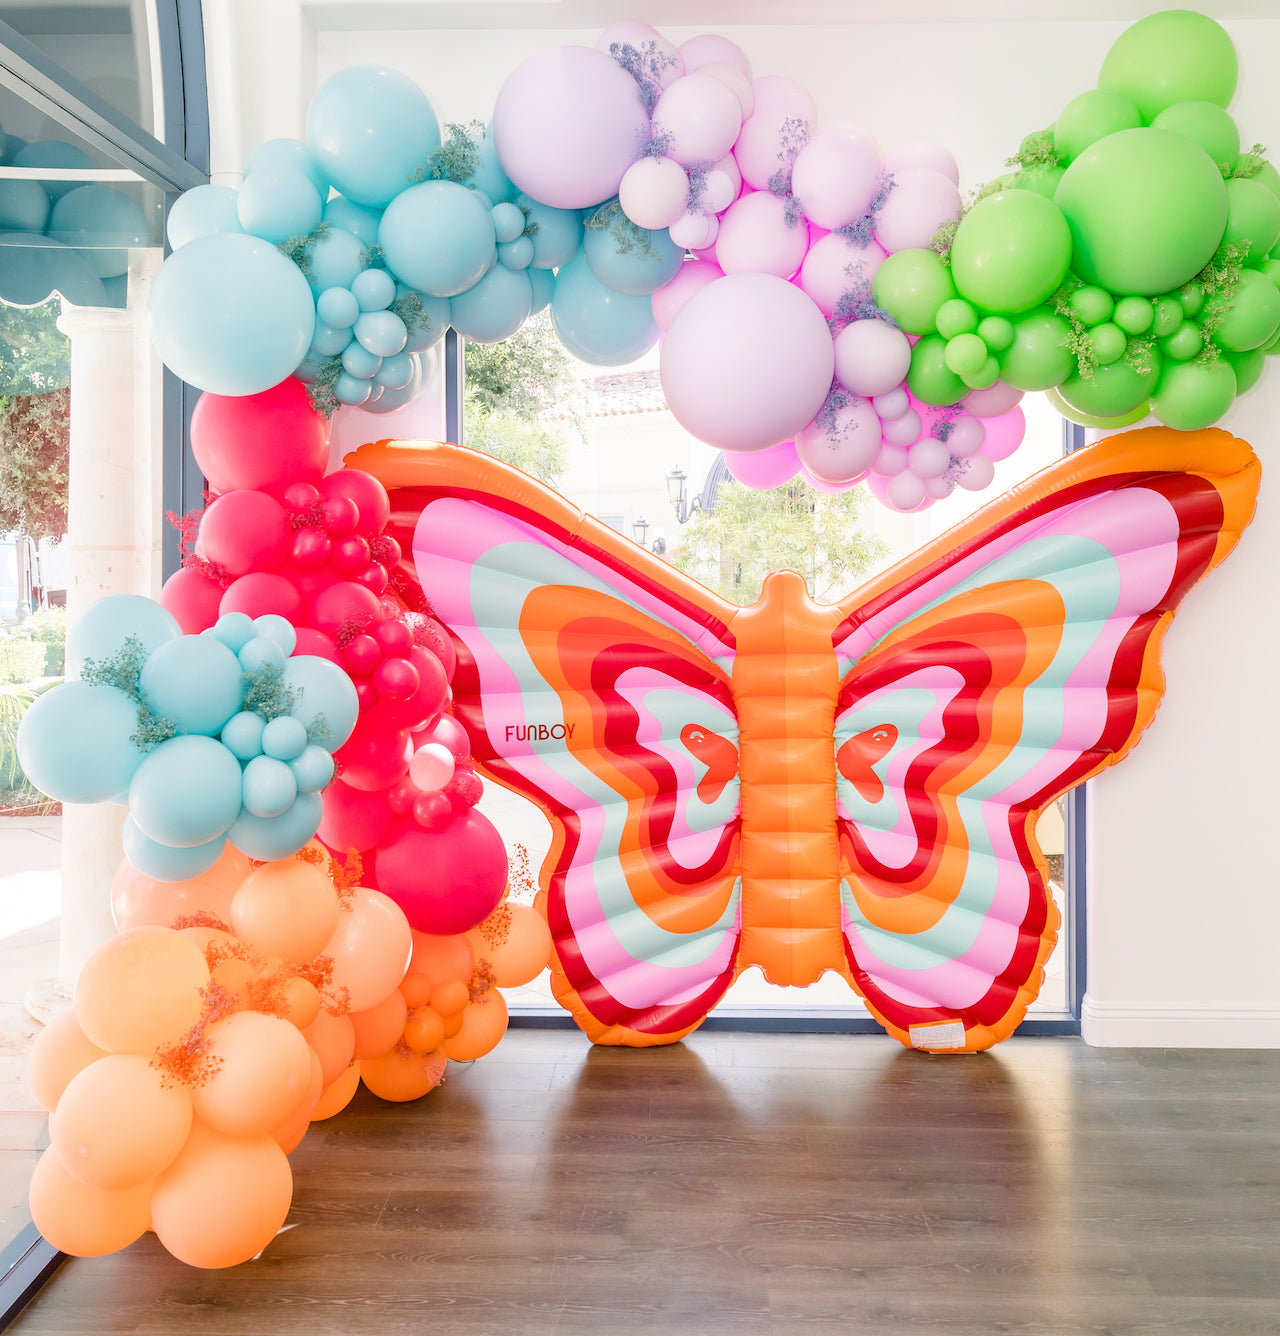 Butterfly birthday party decoration ideas.